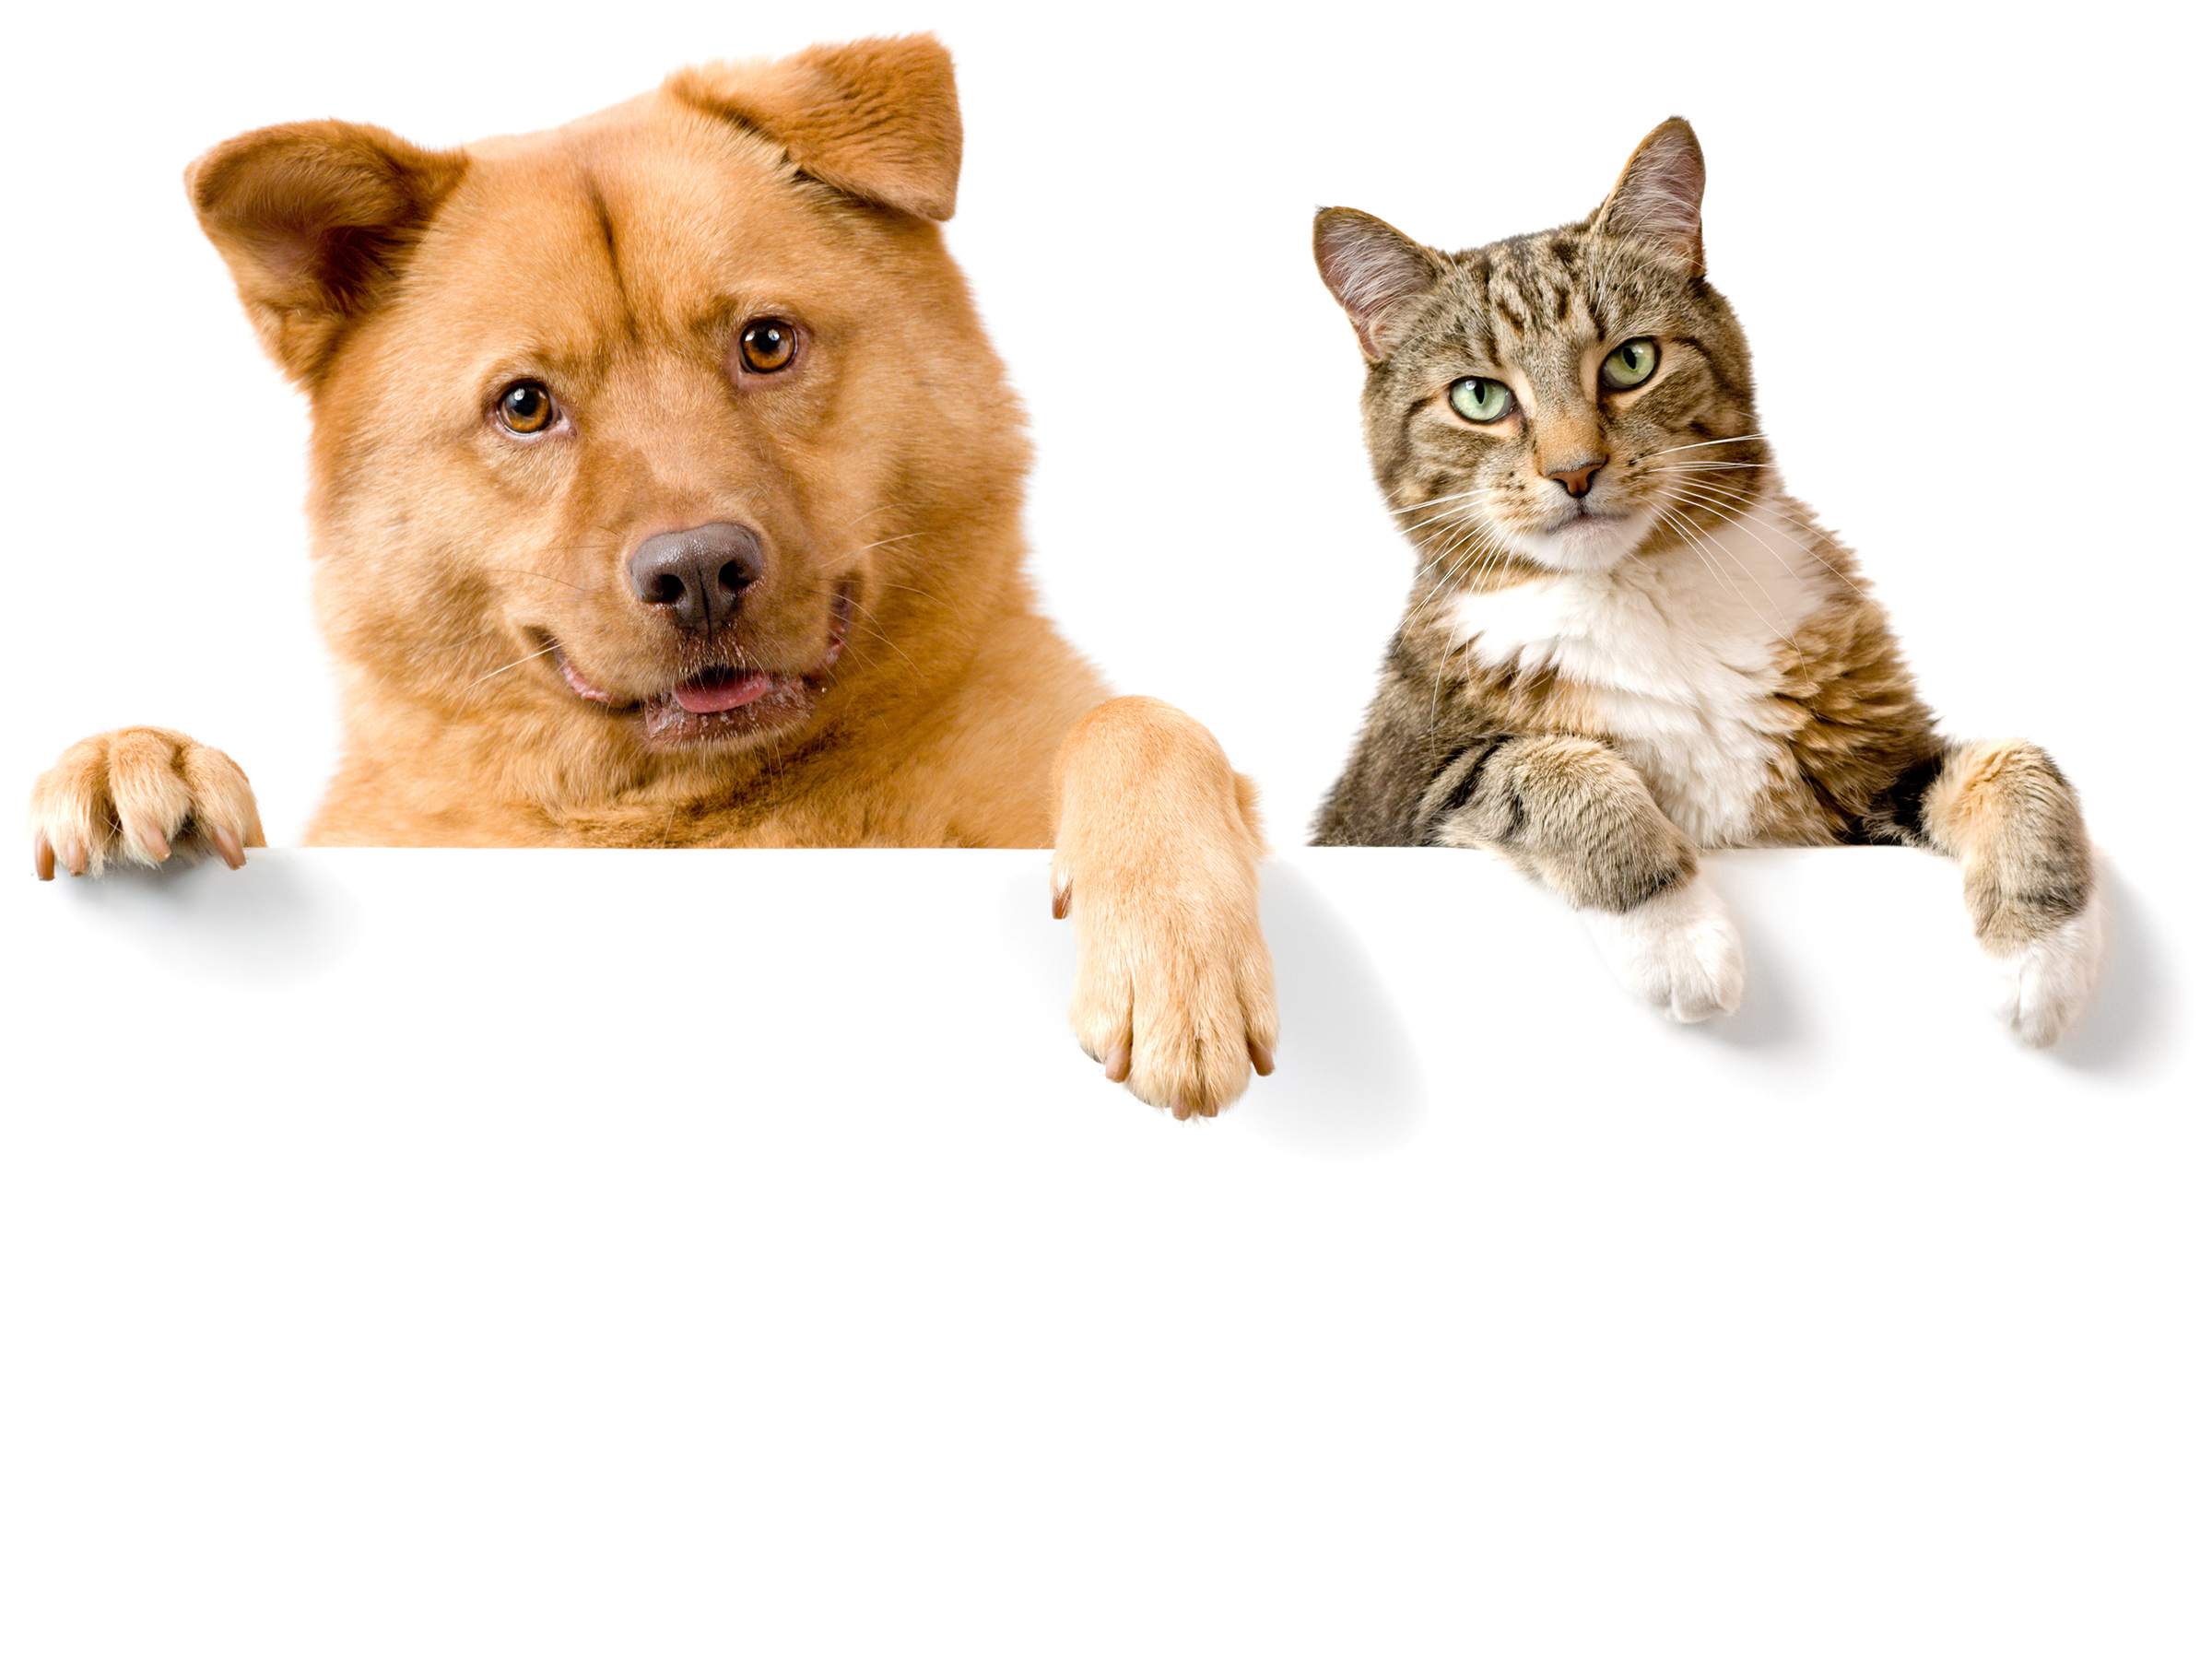 Dog And Cat Wallpaper Full Hq Definition